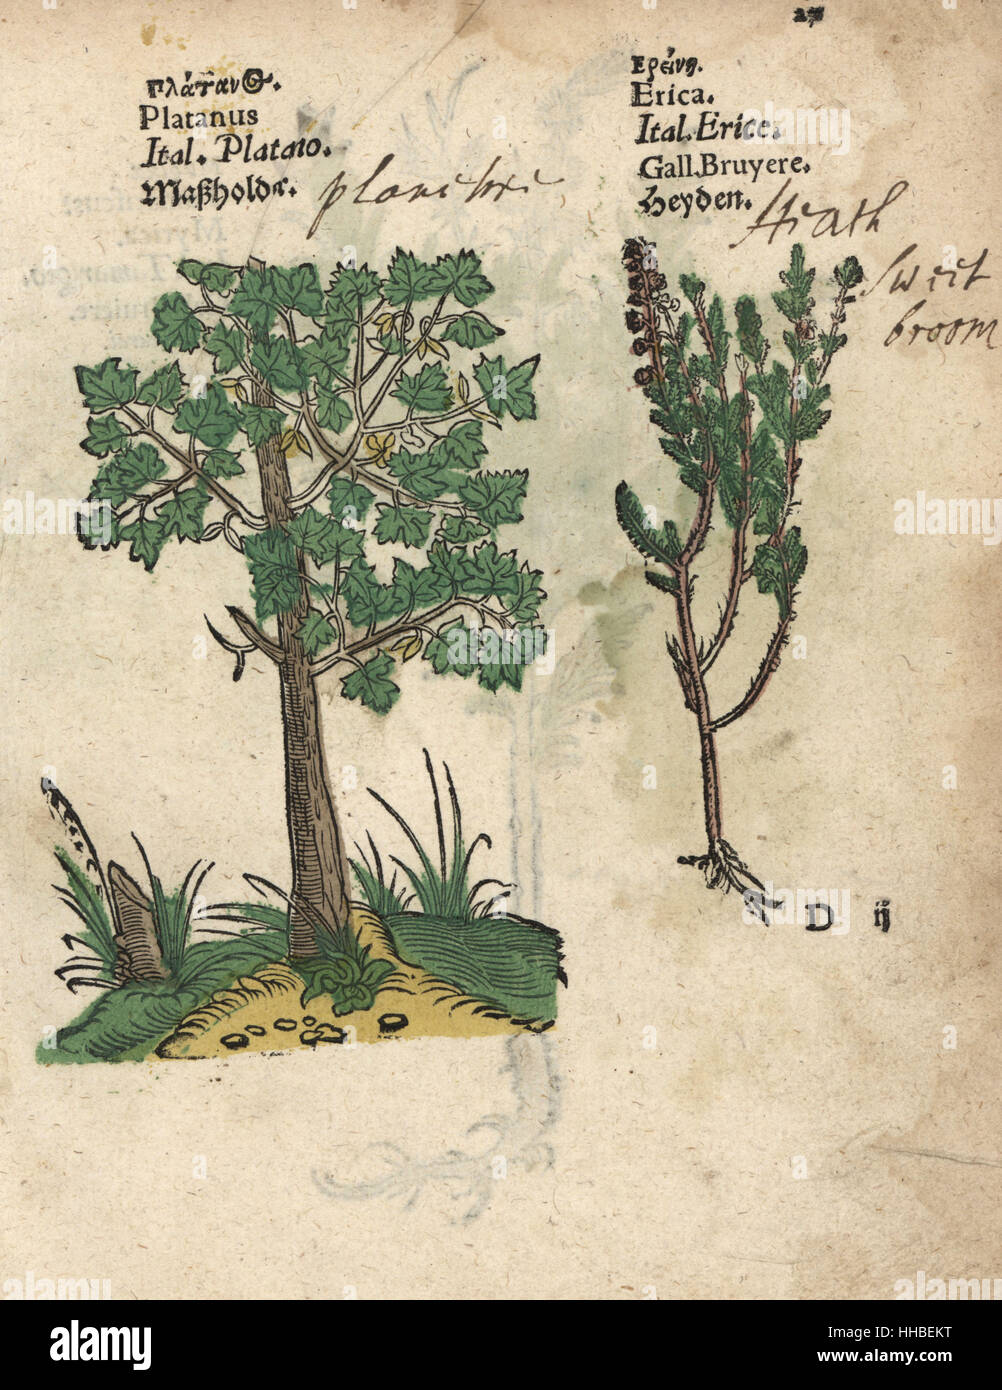 Plane tree, Platanus species, and heath, Erica species. Handcoloured woodblock engraving of a botanical illustration from Adam Lonicer's Krauterbuch, or Herbal, Frankfurt, 1557. This from a 17th century pirate edition or atlas of illustrations only, with captions in Latin, Greek, French, Italian, German, and in English manuscript. Stock Photo